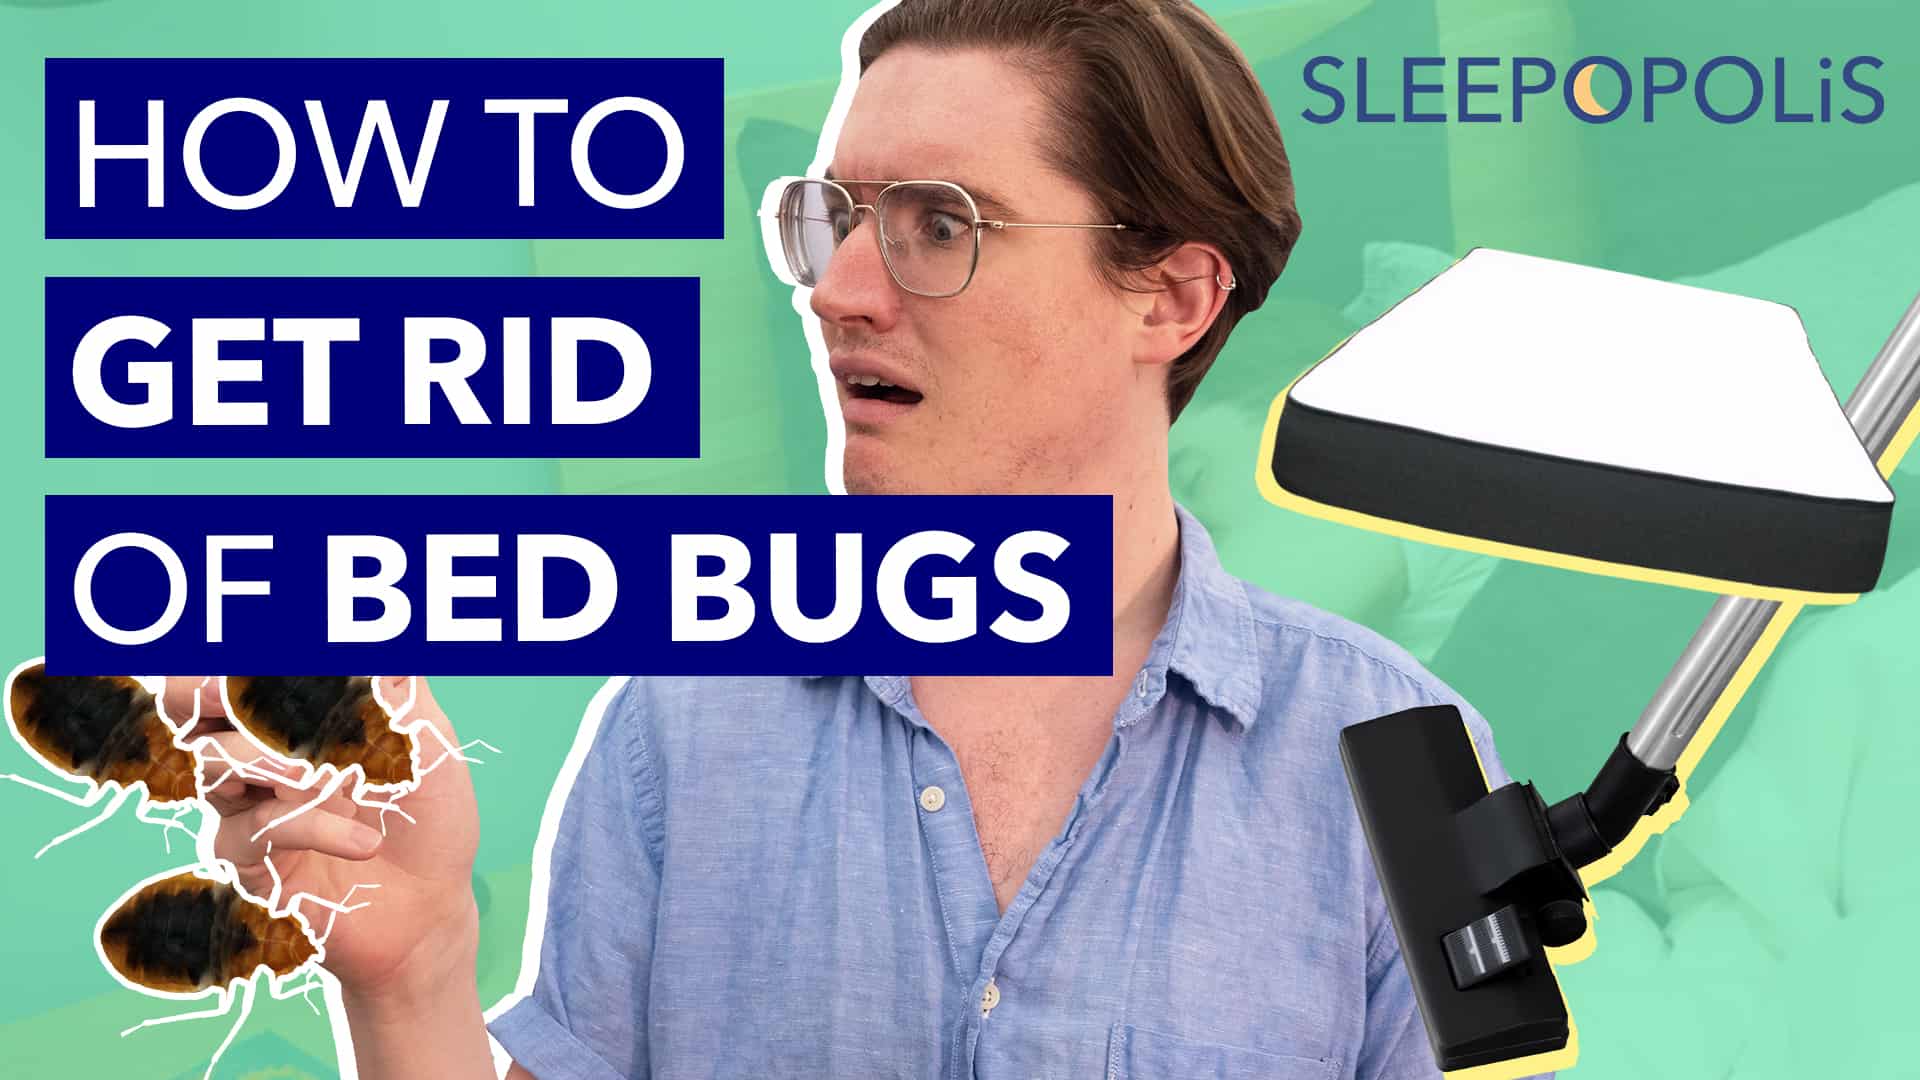 How to Get Rid of Bed Bugs in 3 Easy Steps